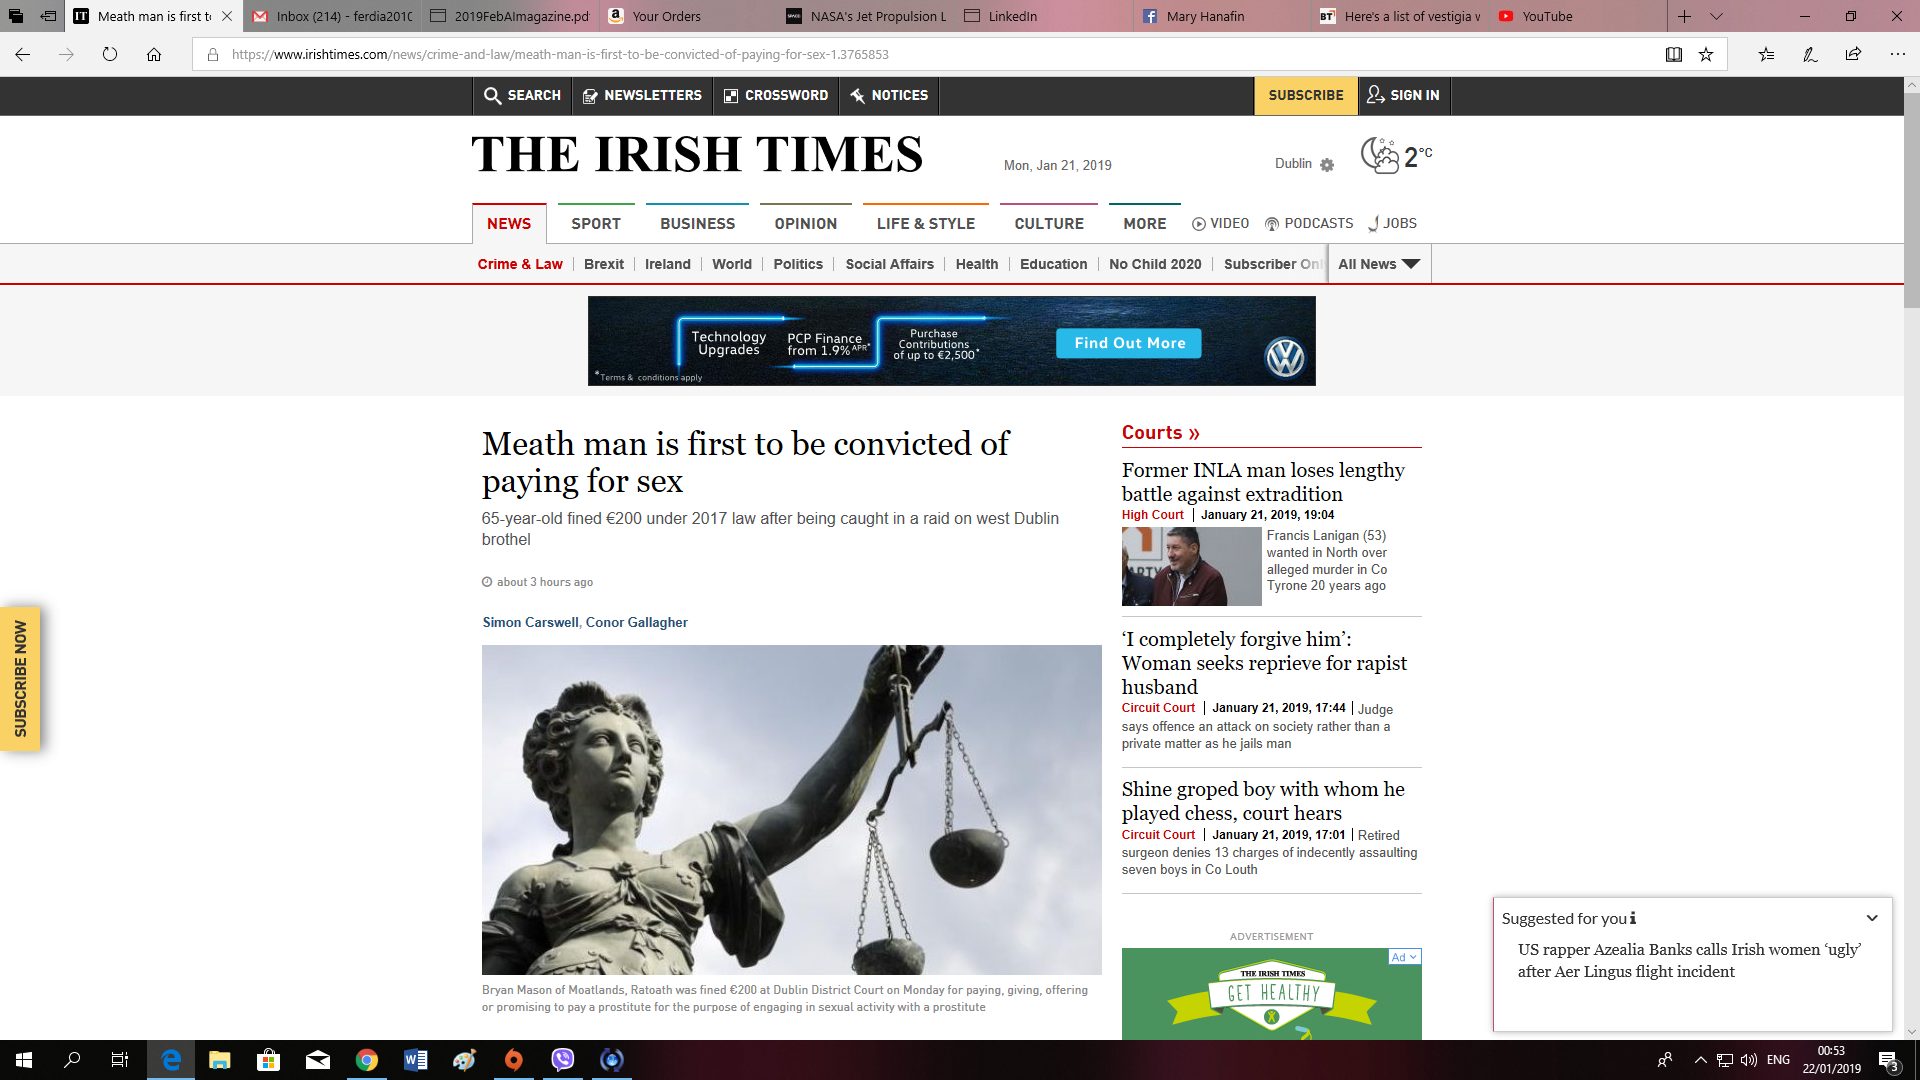 www.irishtimes.com/news/crime-and-law/meath-man-is-first-to-be-convicted-of-paying-for-sex-1.3765853